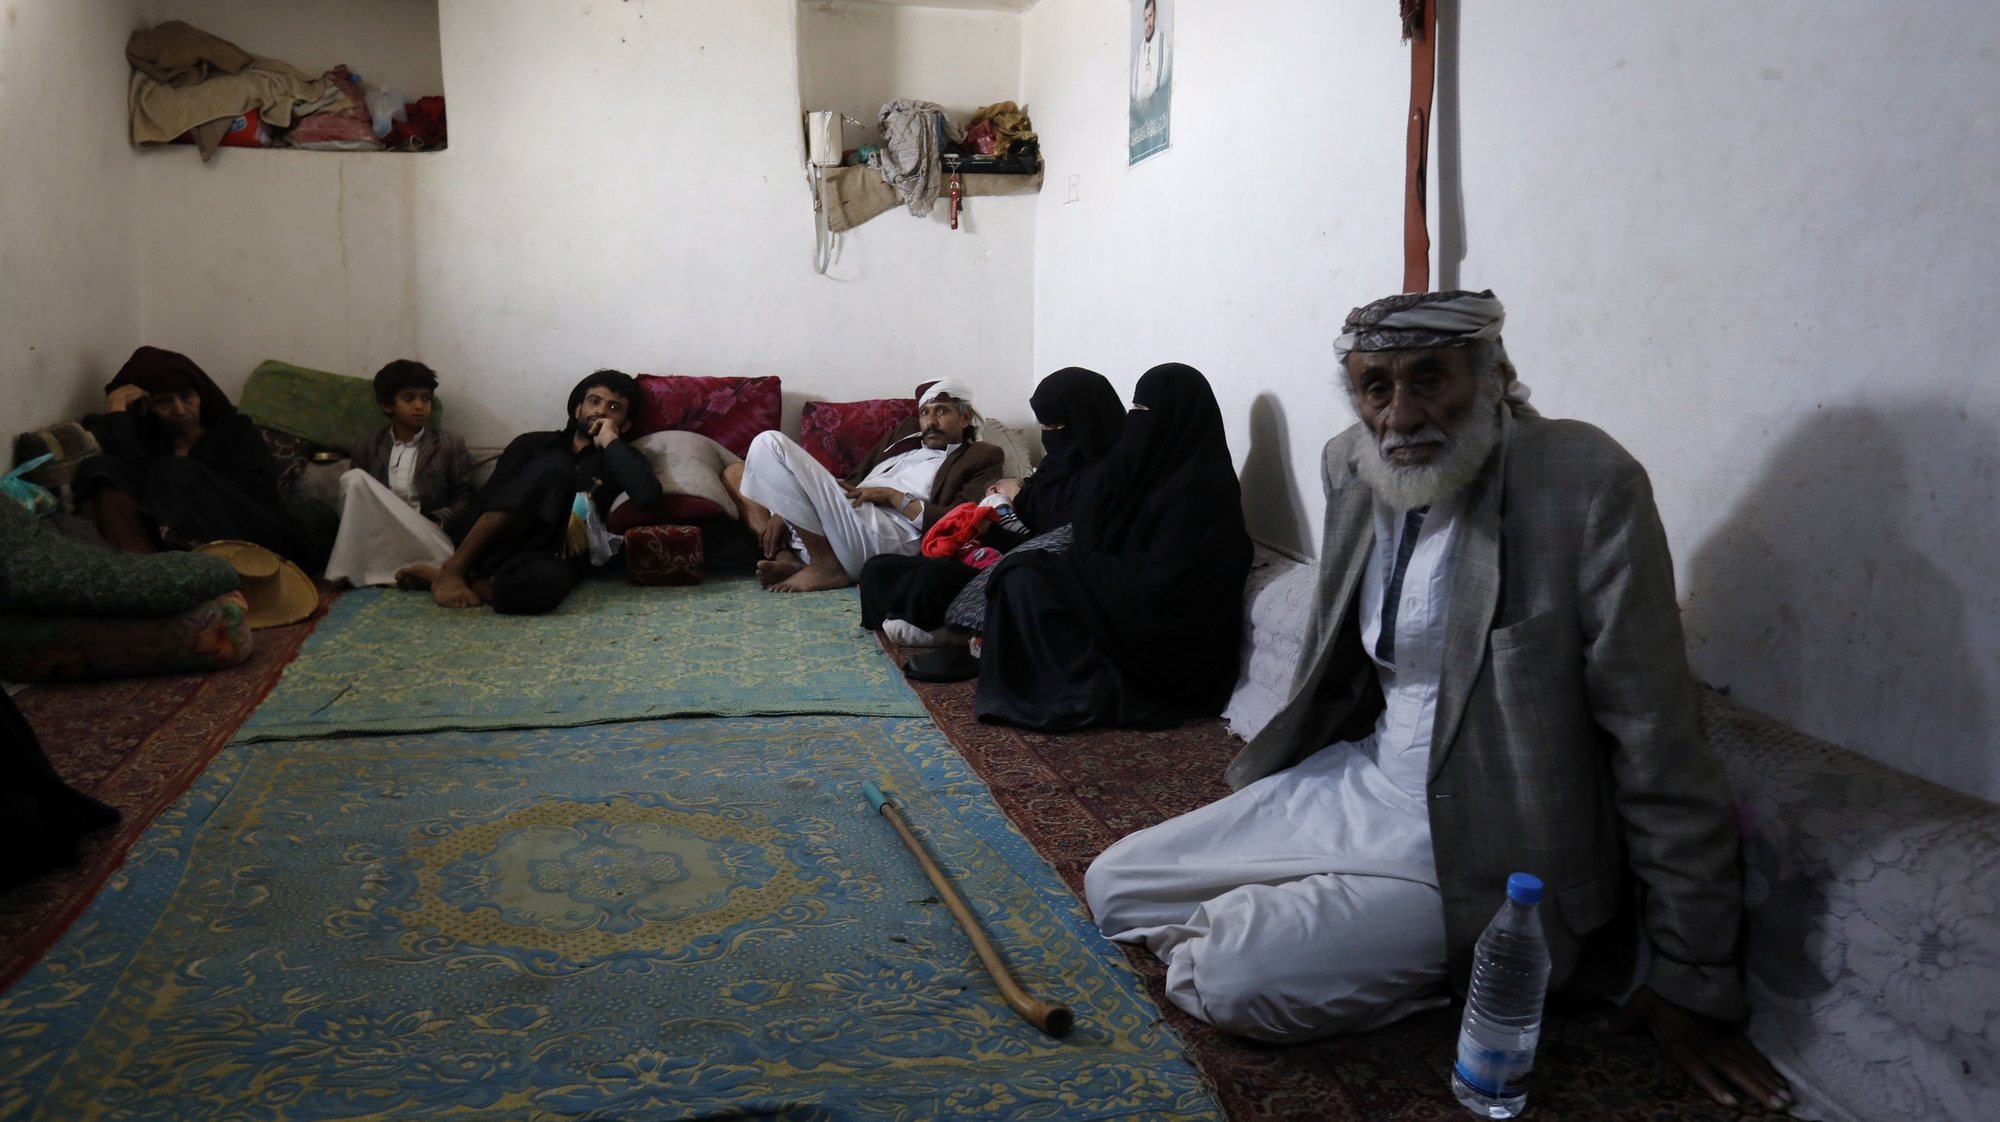 epa08495615 Yemeni displaced Mohammed Ahmed, 77, (R) and his relatives sit in a rental house in Sanaa, Yemen, 18 June 2020 (issued 19 June 2020). He says &#039;I have been displaced from the city of Haradh, northwestern Yemen, since 2016 due to the war that destroyed homes and roads. We displaced to Sanaa, leaving our properties there. We had no choice but to do so. We have no income except what we earn from collecting and selling plastic items. We receive a food ration from the World Food Programme once in every two months. It is not enough for a family of eight&#039;. World Refugee Day is marked annually on 20 June. According to the UNHCR, more and more refugees today live in urban settings outside refugee camps. Some crises have lasted so long that the tent camps became built-up urban areas. While some refugees depend on international help through NGOs, others start a new life, changing everything from occupation, to social status, to adapt to their new realities.  EPA/YAHYA ARHAB  ATTENTION: This Image is part of a PHOTO SET